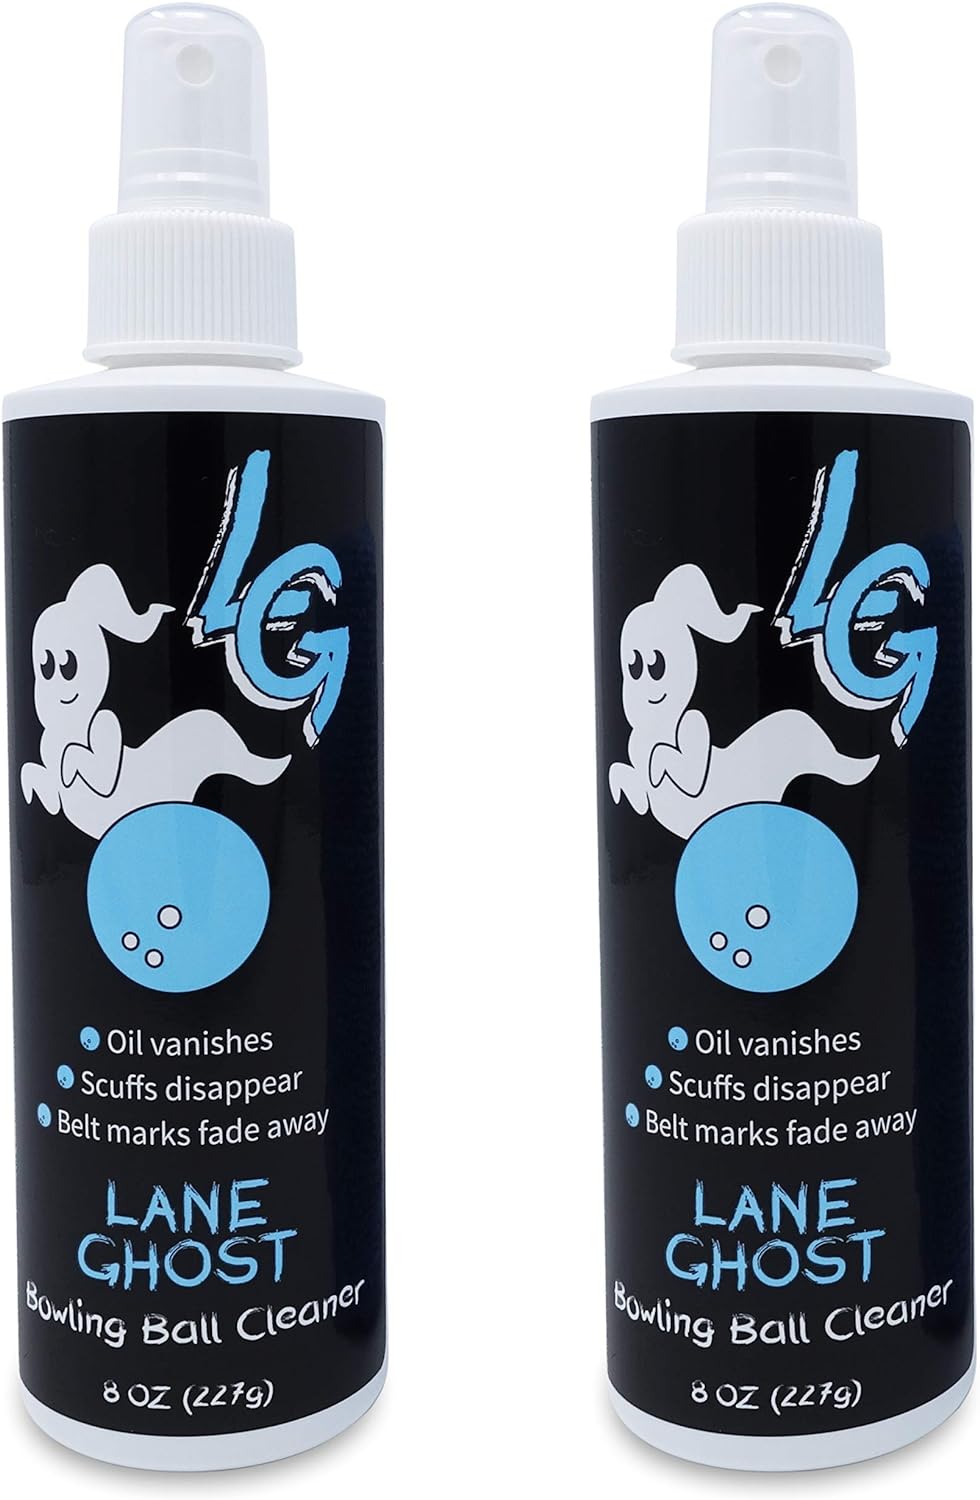 Lane Ghost Bowling Ball Cleaner Spray Kit - 2 Pack - USBC Approved - Oil, Scuff, and Belt Mark Cleaner - Restores Tack and Prolongs Lifespan of Ball